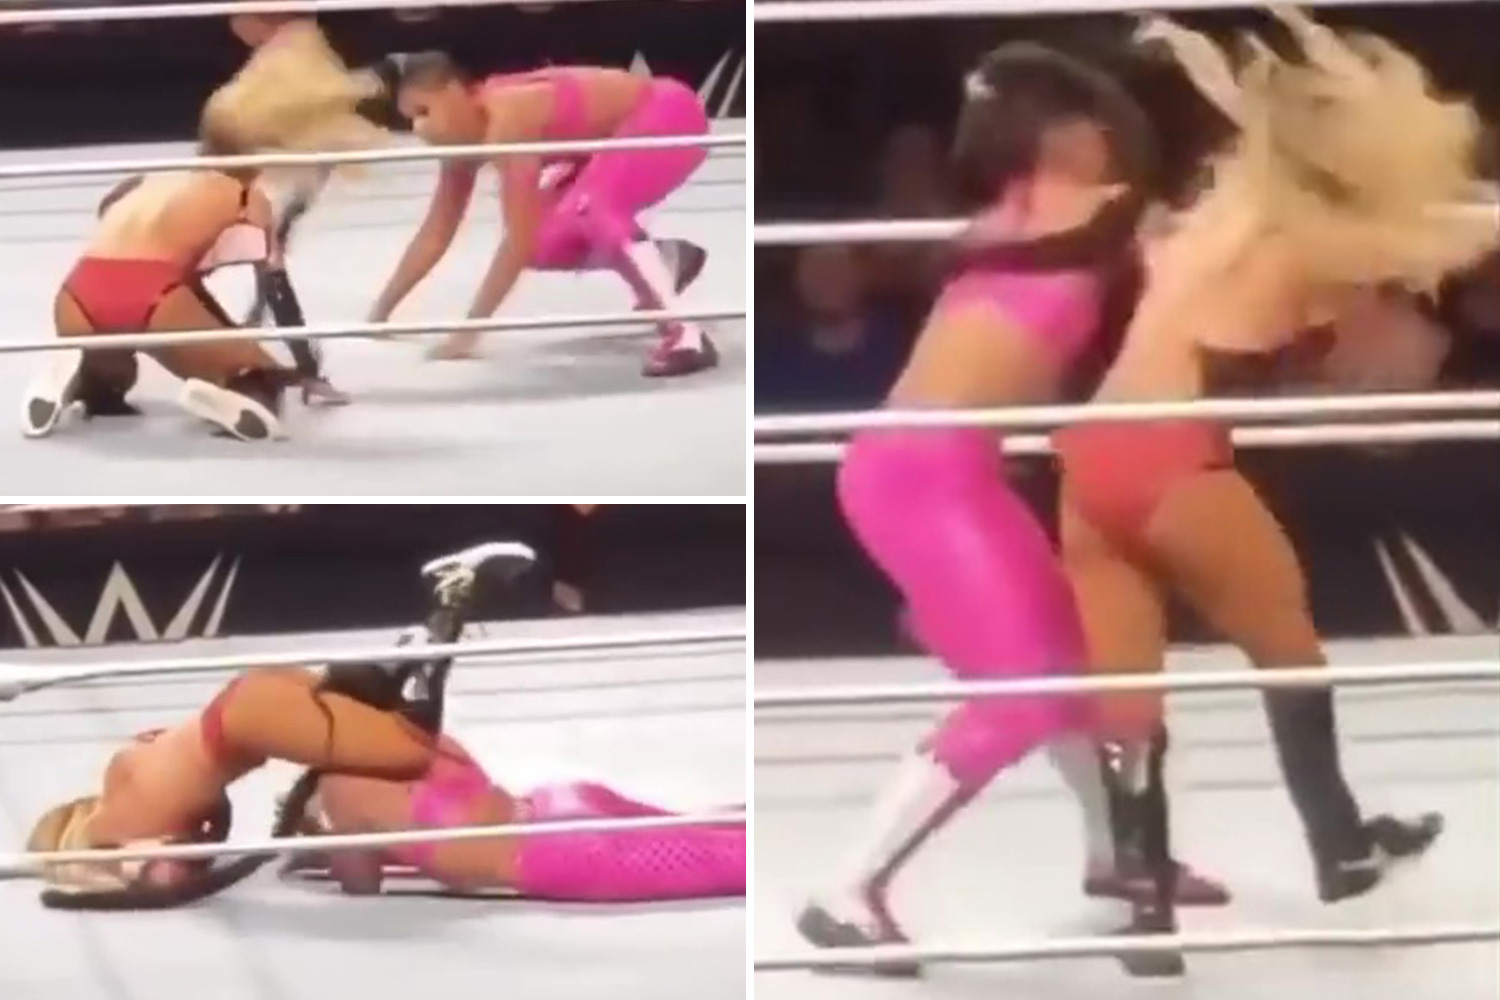 casey st john recommends wwe nip slips and wardrobe malfunctions pic